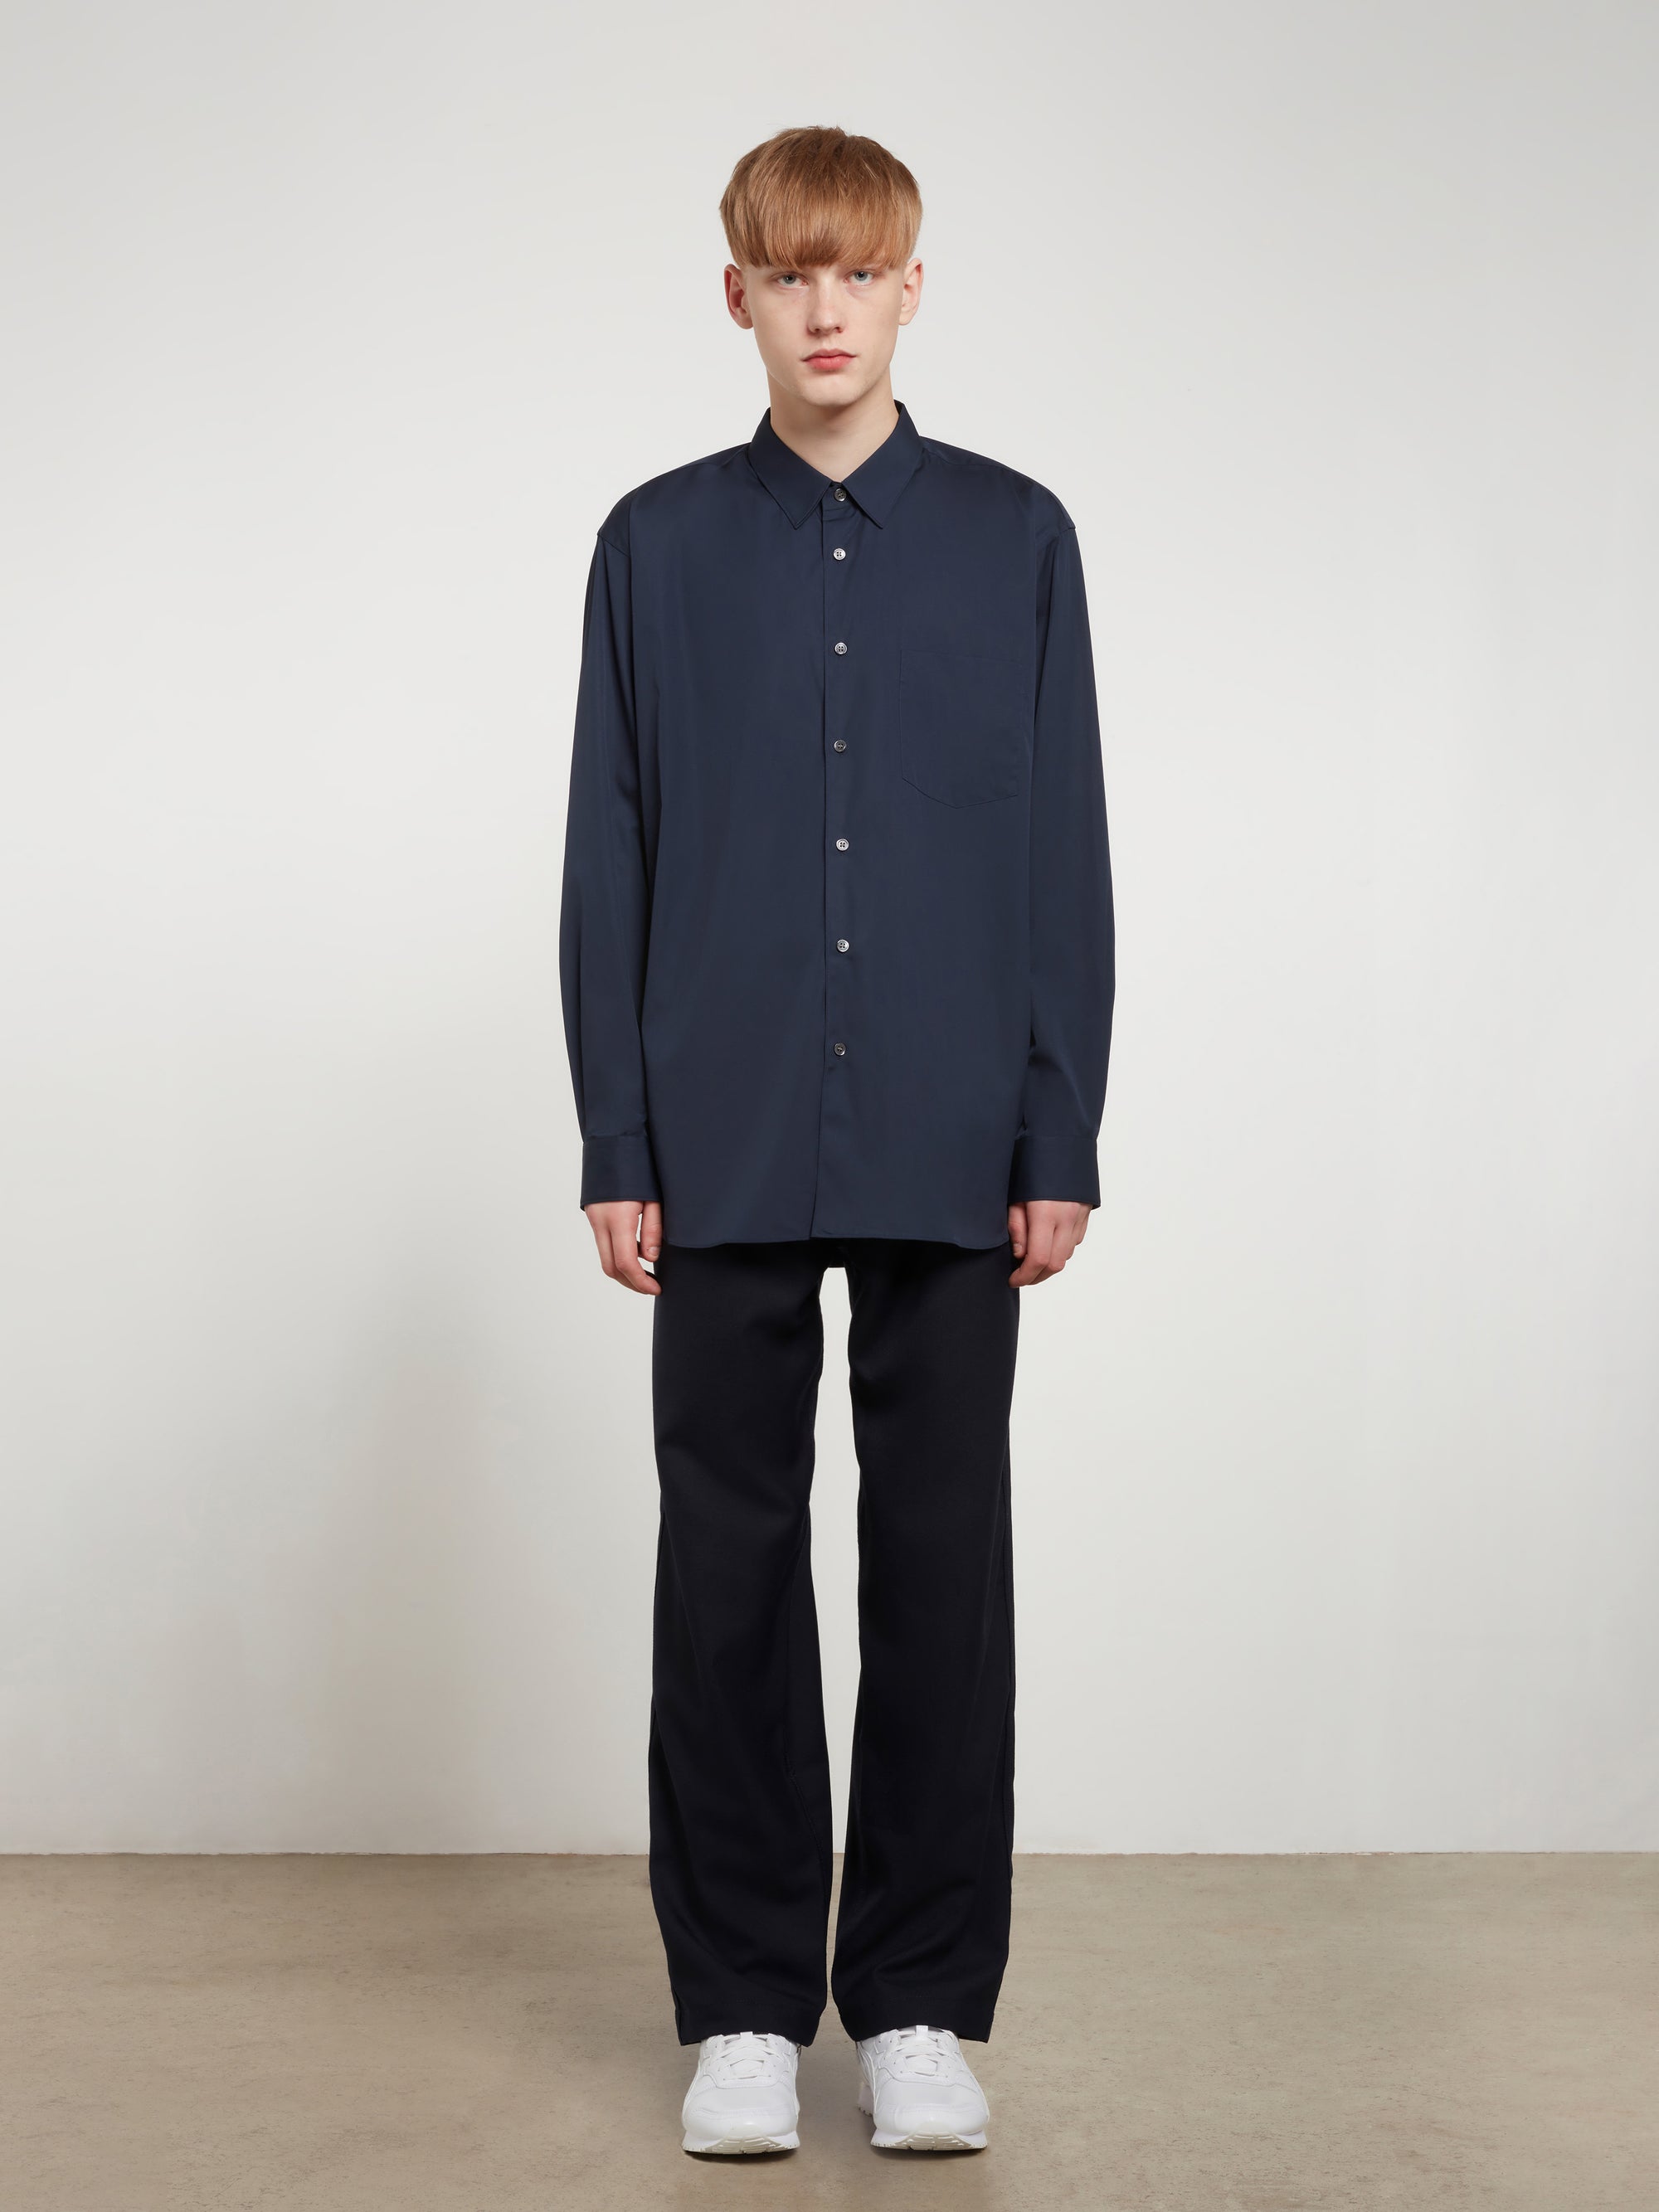 CDG Shirt Forever - Wide Fit Cotton Shirt - (Navy) view 5